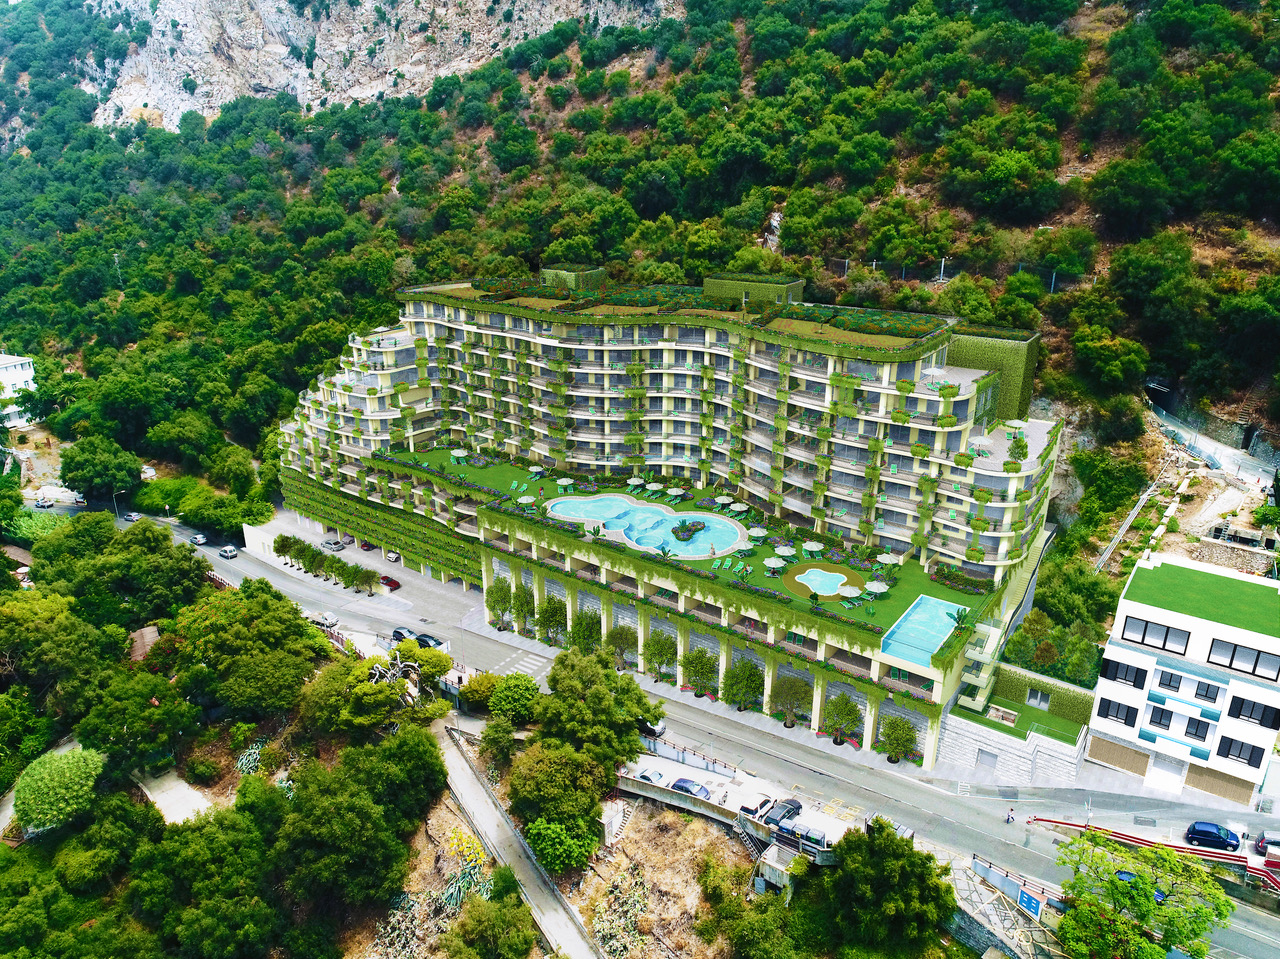 The Greenest Building Ever In Gibraltar – Literally! Image